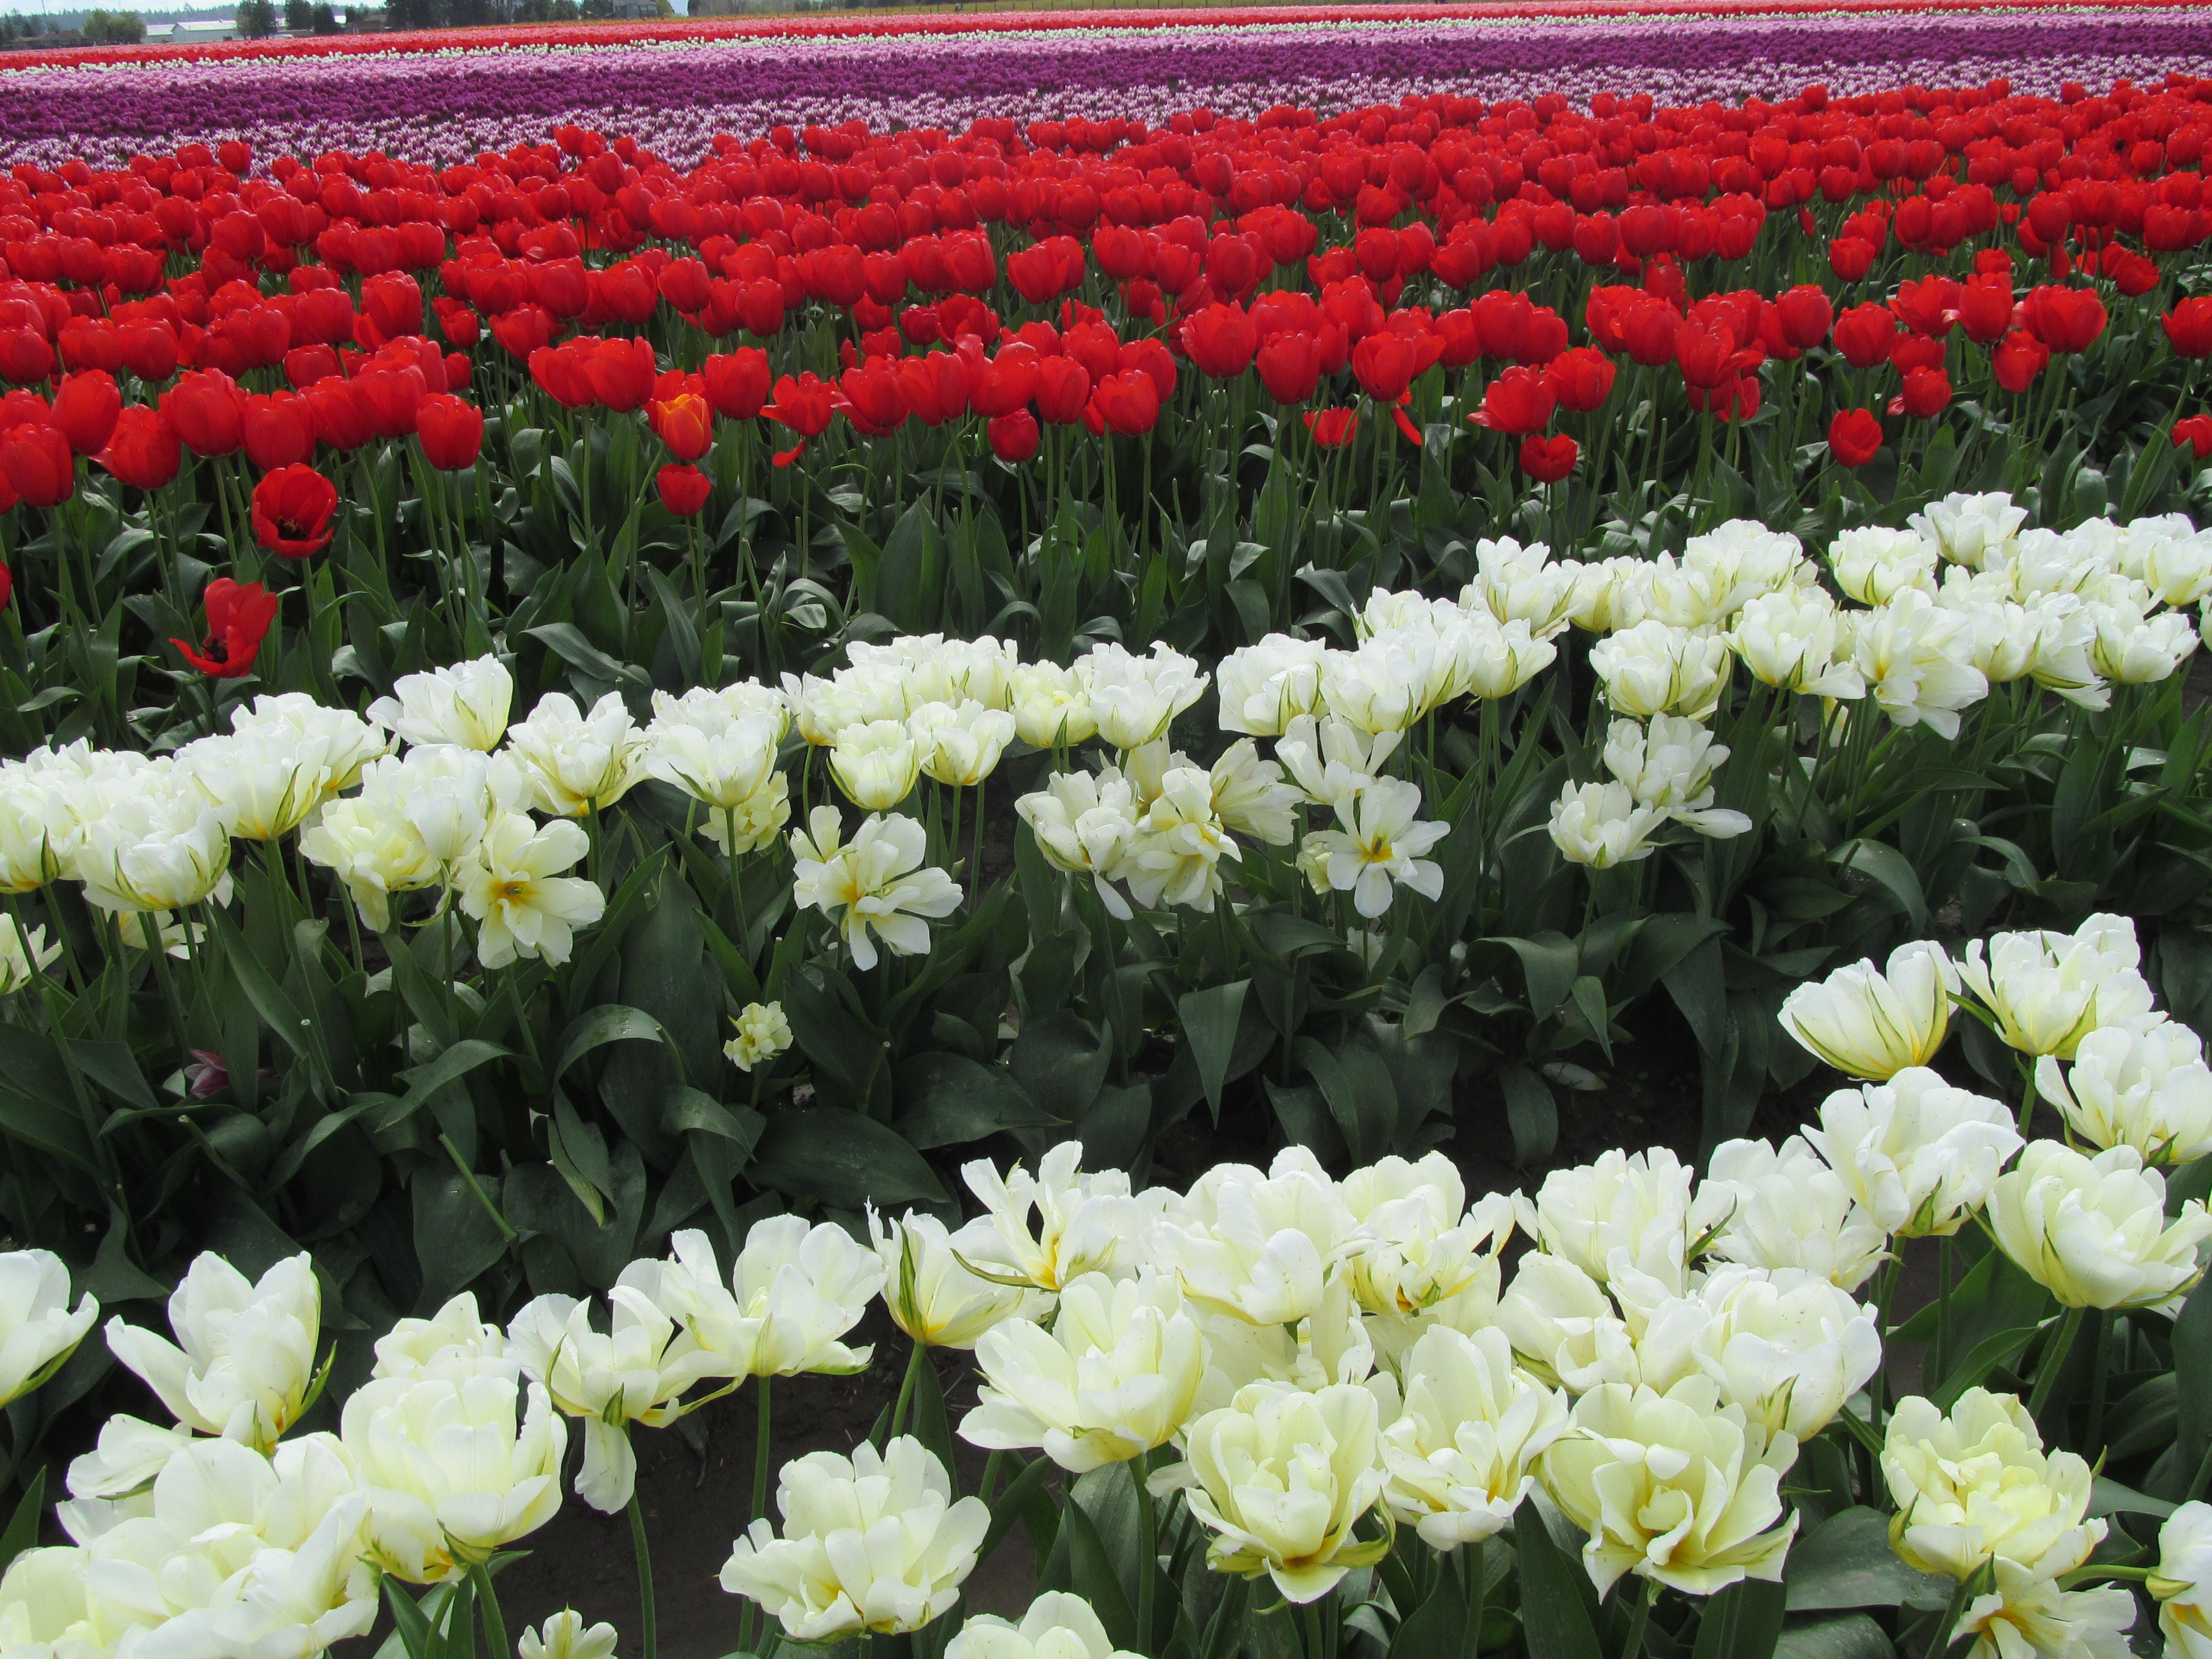 Rows of white tulips contrast the deep red ones in a field in Skagit ...